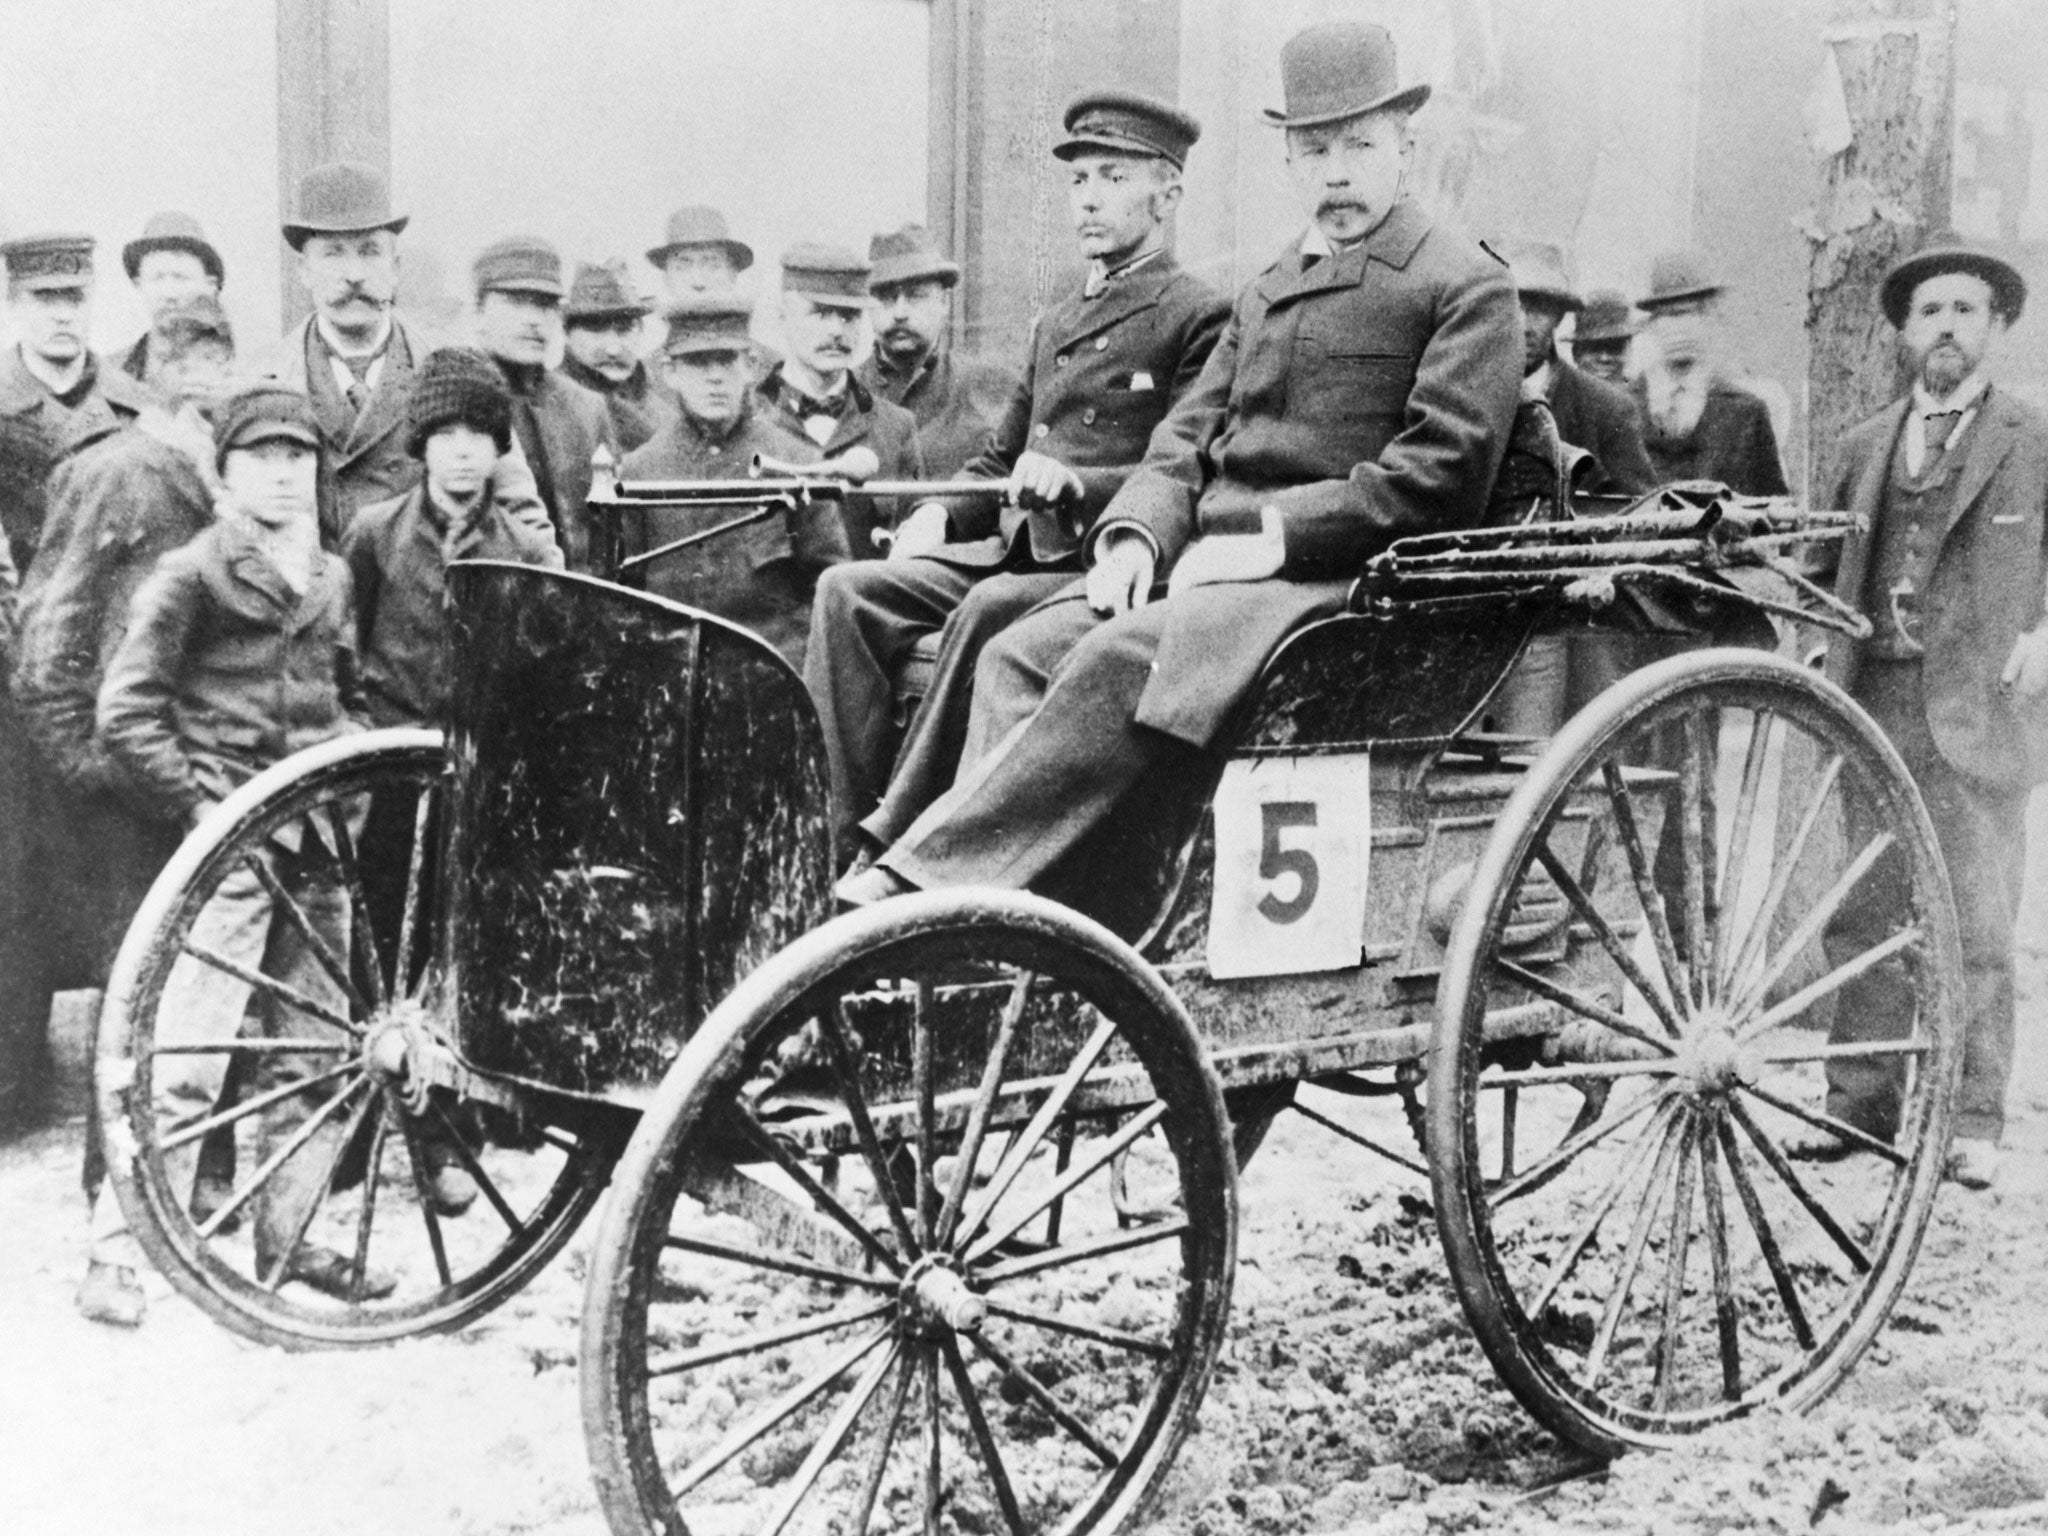 J. Frank Duryea pictured in the car he co-created in Illinois, 1895